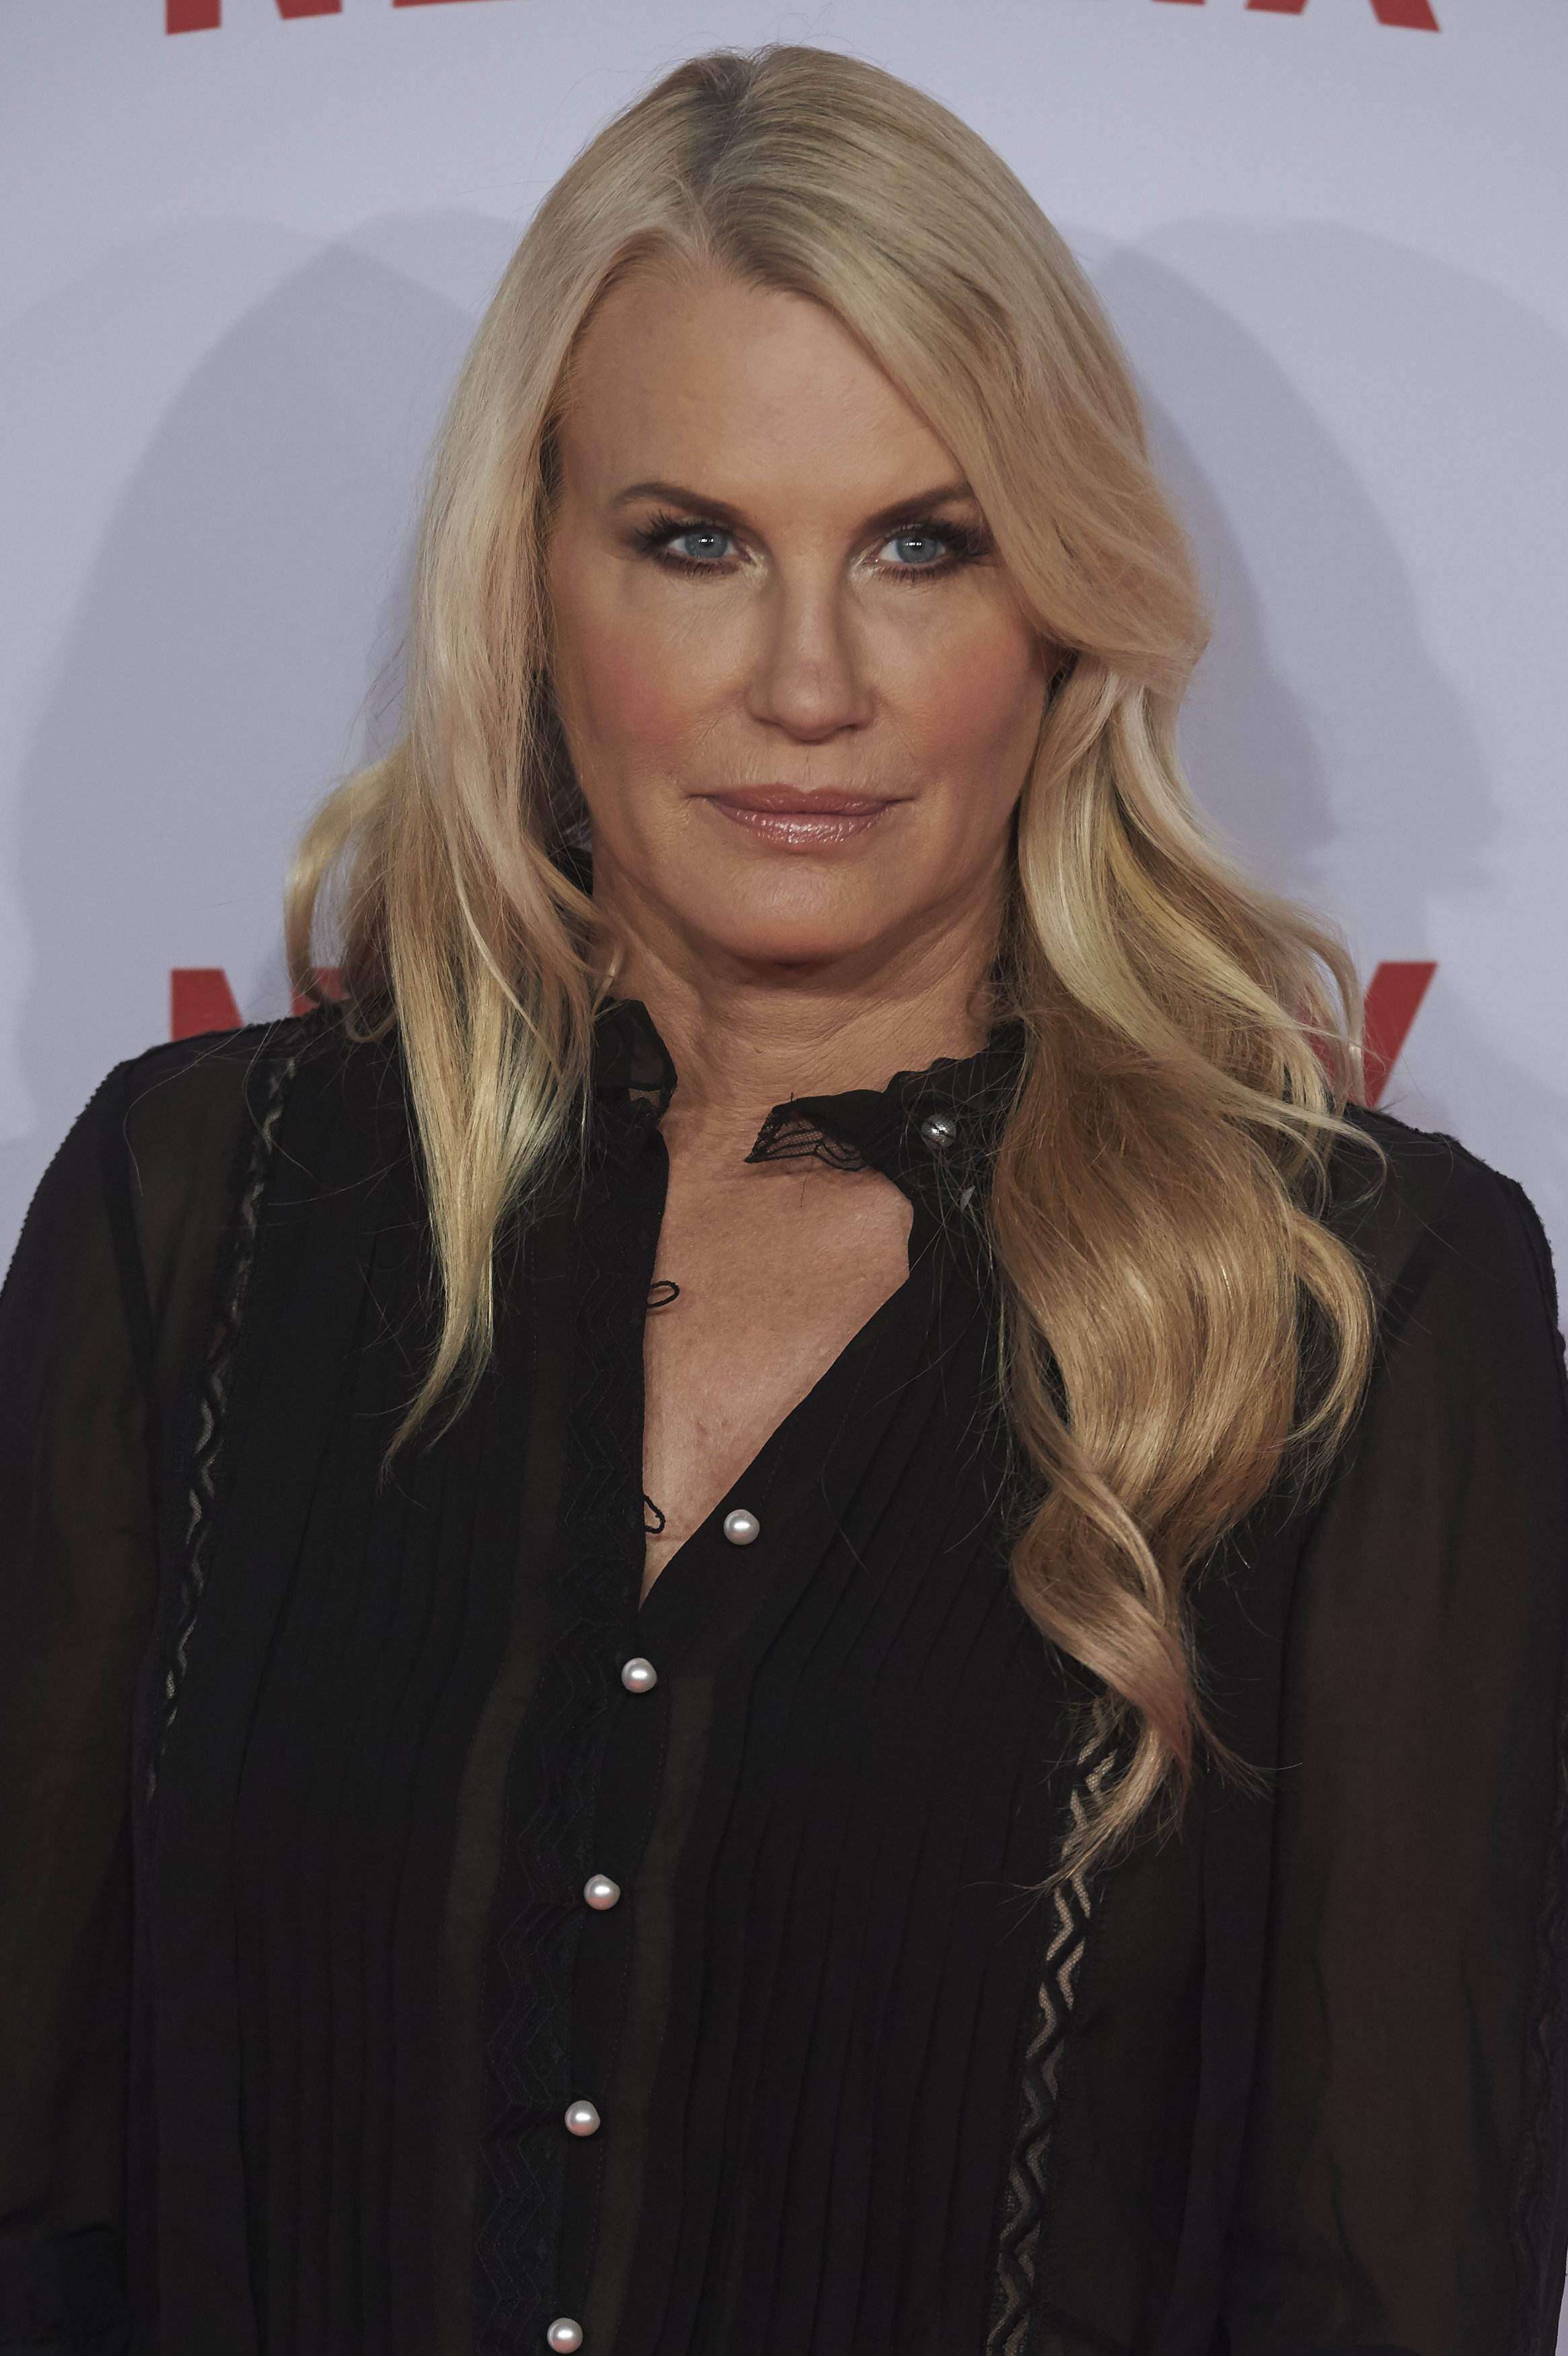 MADRID, SPAIN - OCTOBER 20: Actress Daryl Hannah attends the red carpet of Netflix presentation at the Matadero Cultural center on October 20, 2015 in Madrid, Spain. (Photo by Carlos Alvarez/Getty Images)